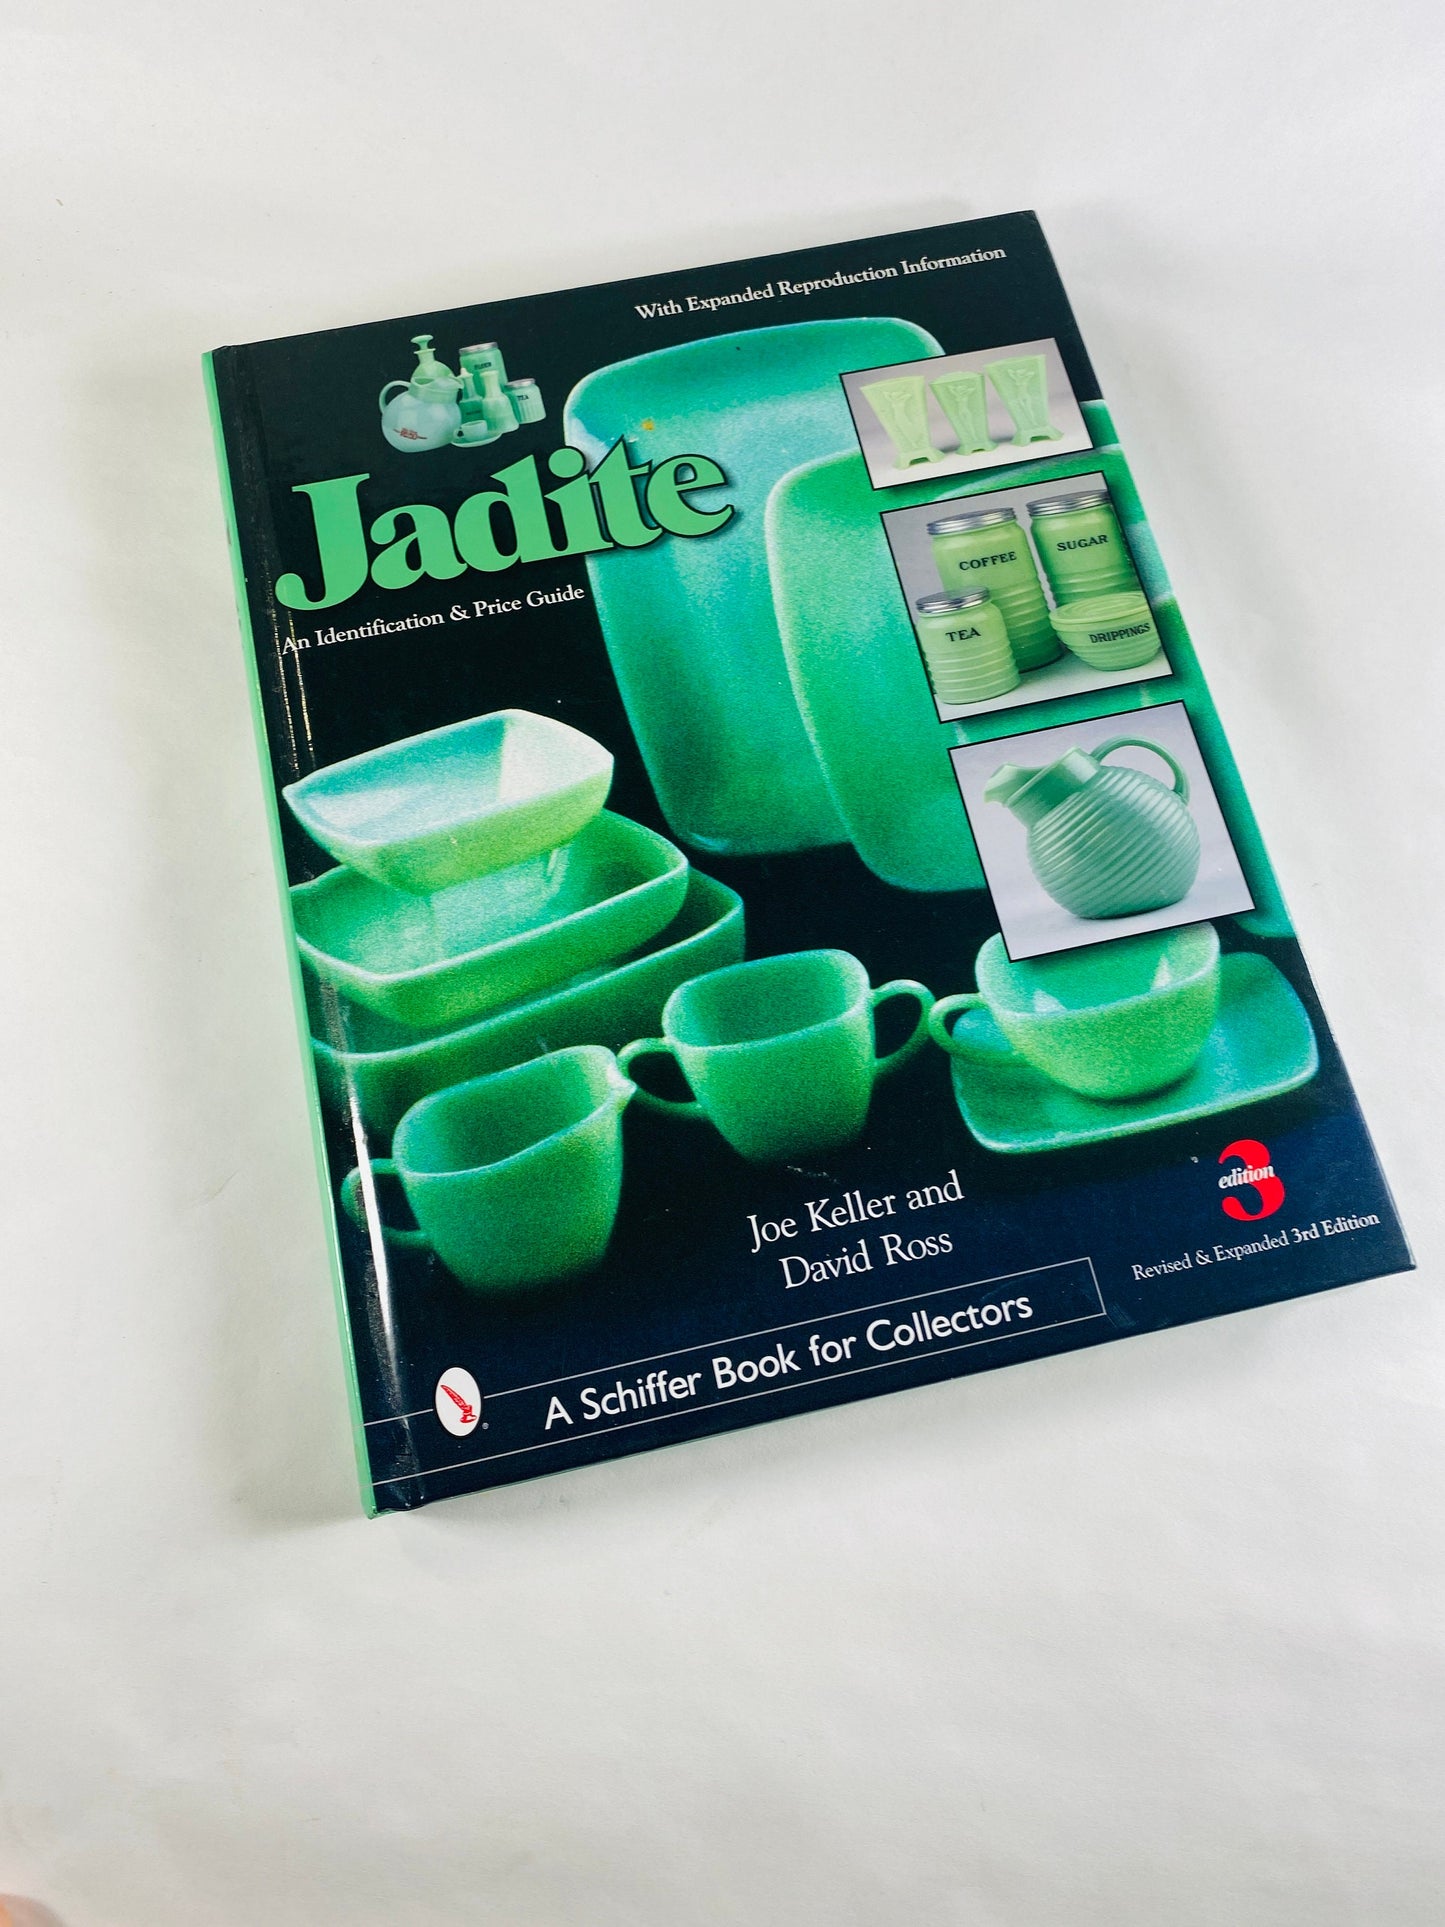 Jadite collector's guide by Joe Keller LARGE vintage book with company history and model list